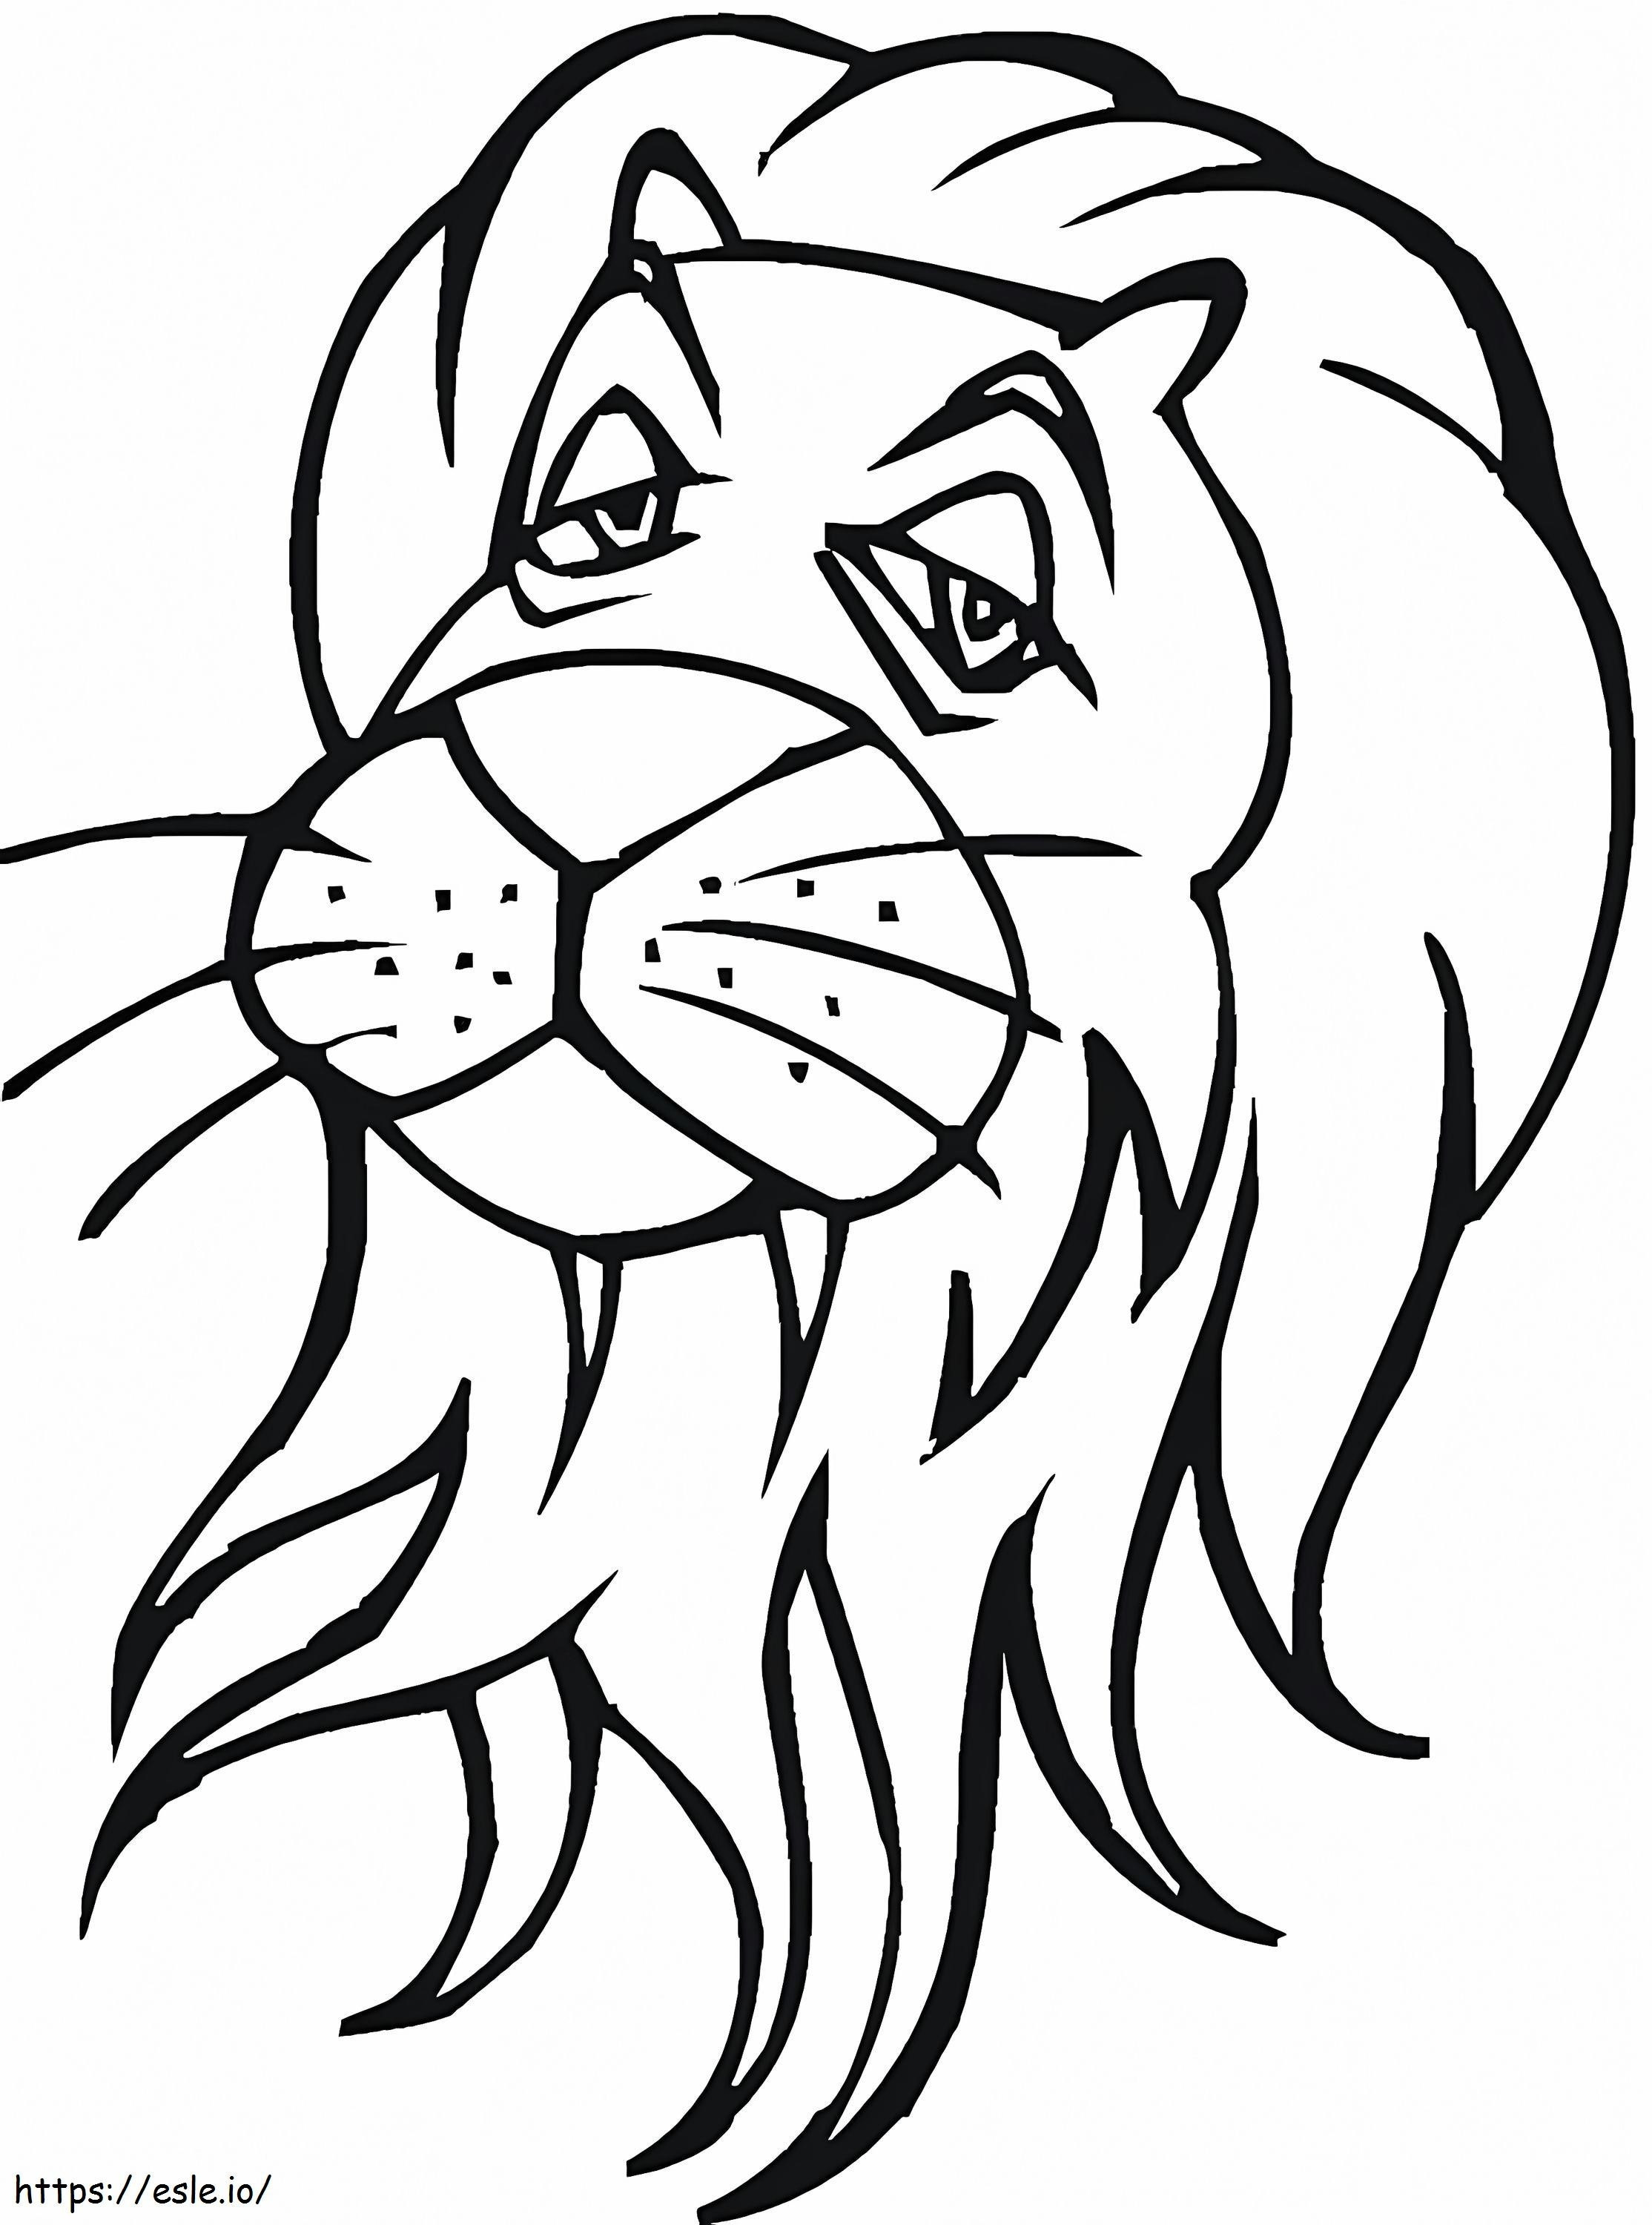 Lion Head 1 coloring page